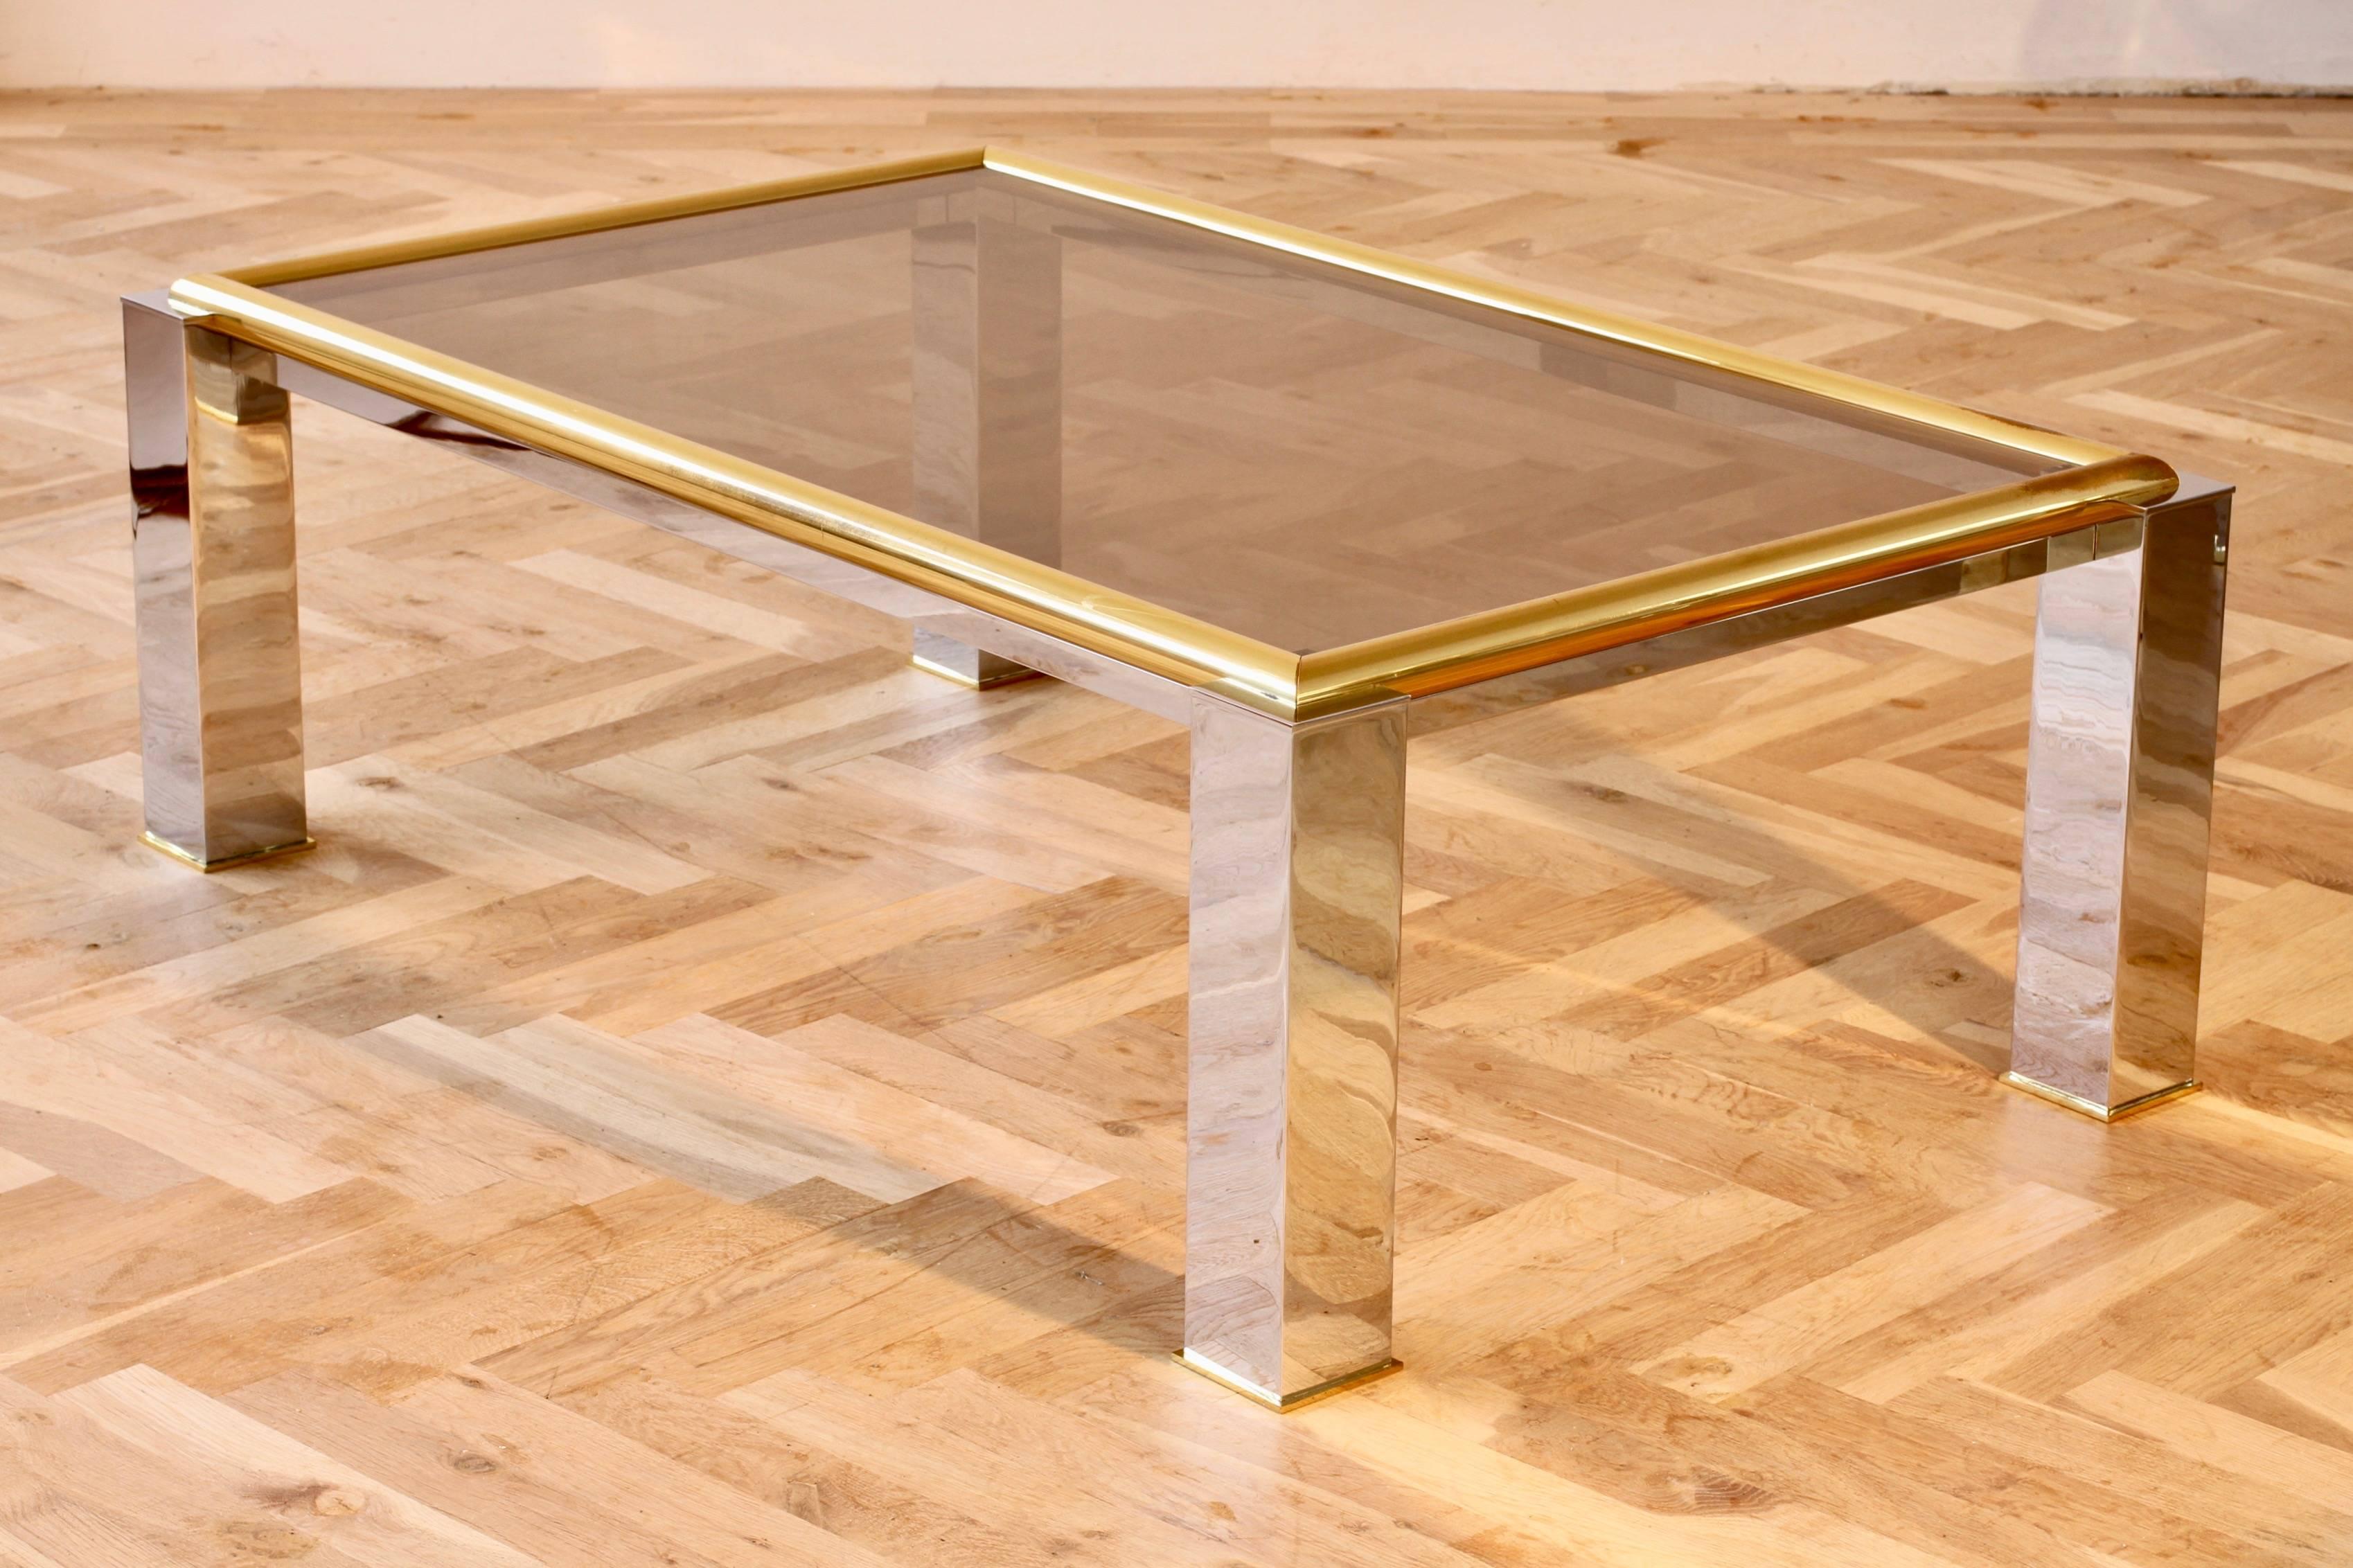 German Large Bicolor Brass and Chrome Smoked Glass Coffee Table 1970s Springer Style For Sale